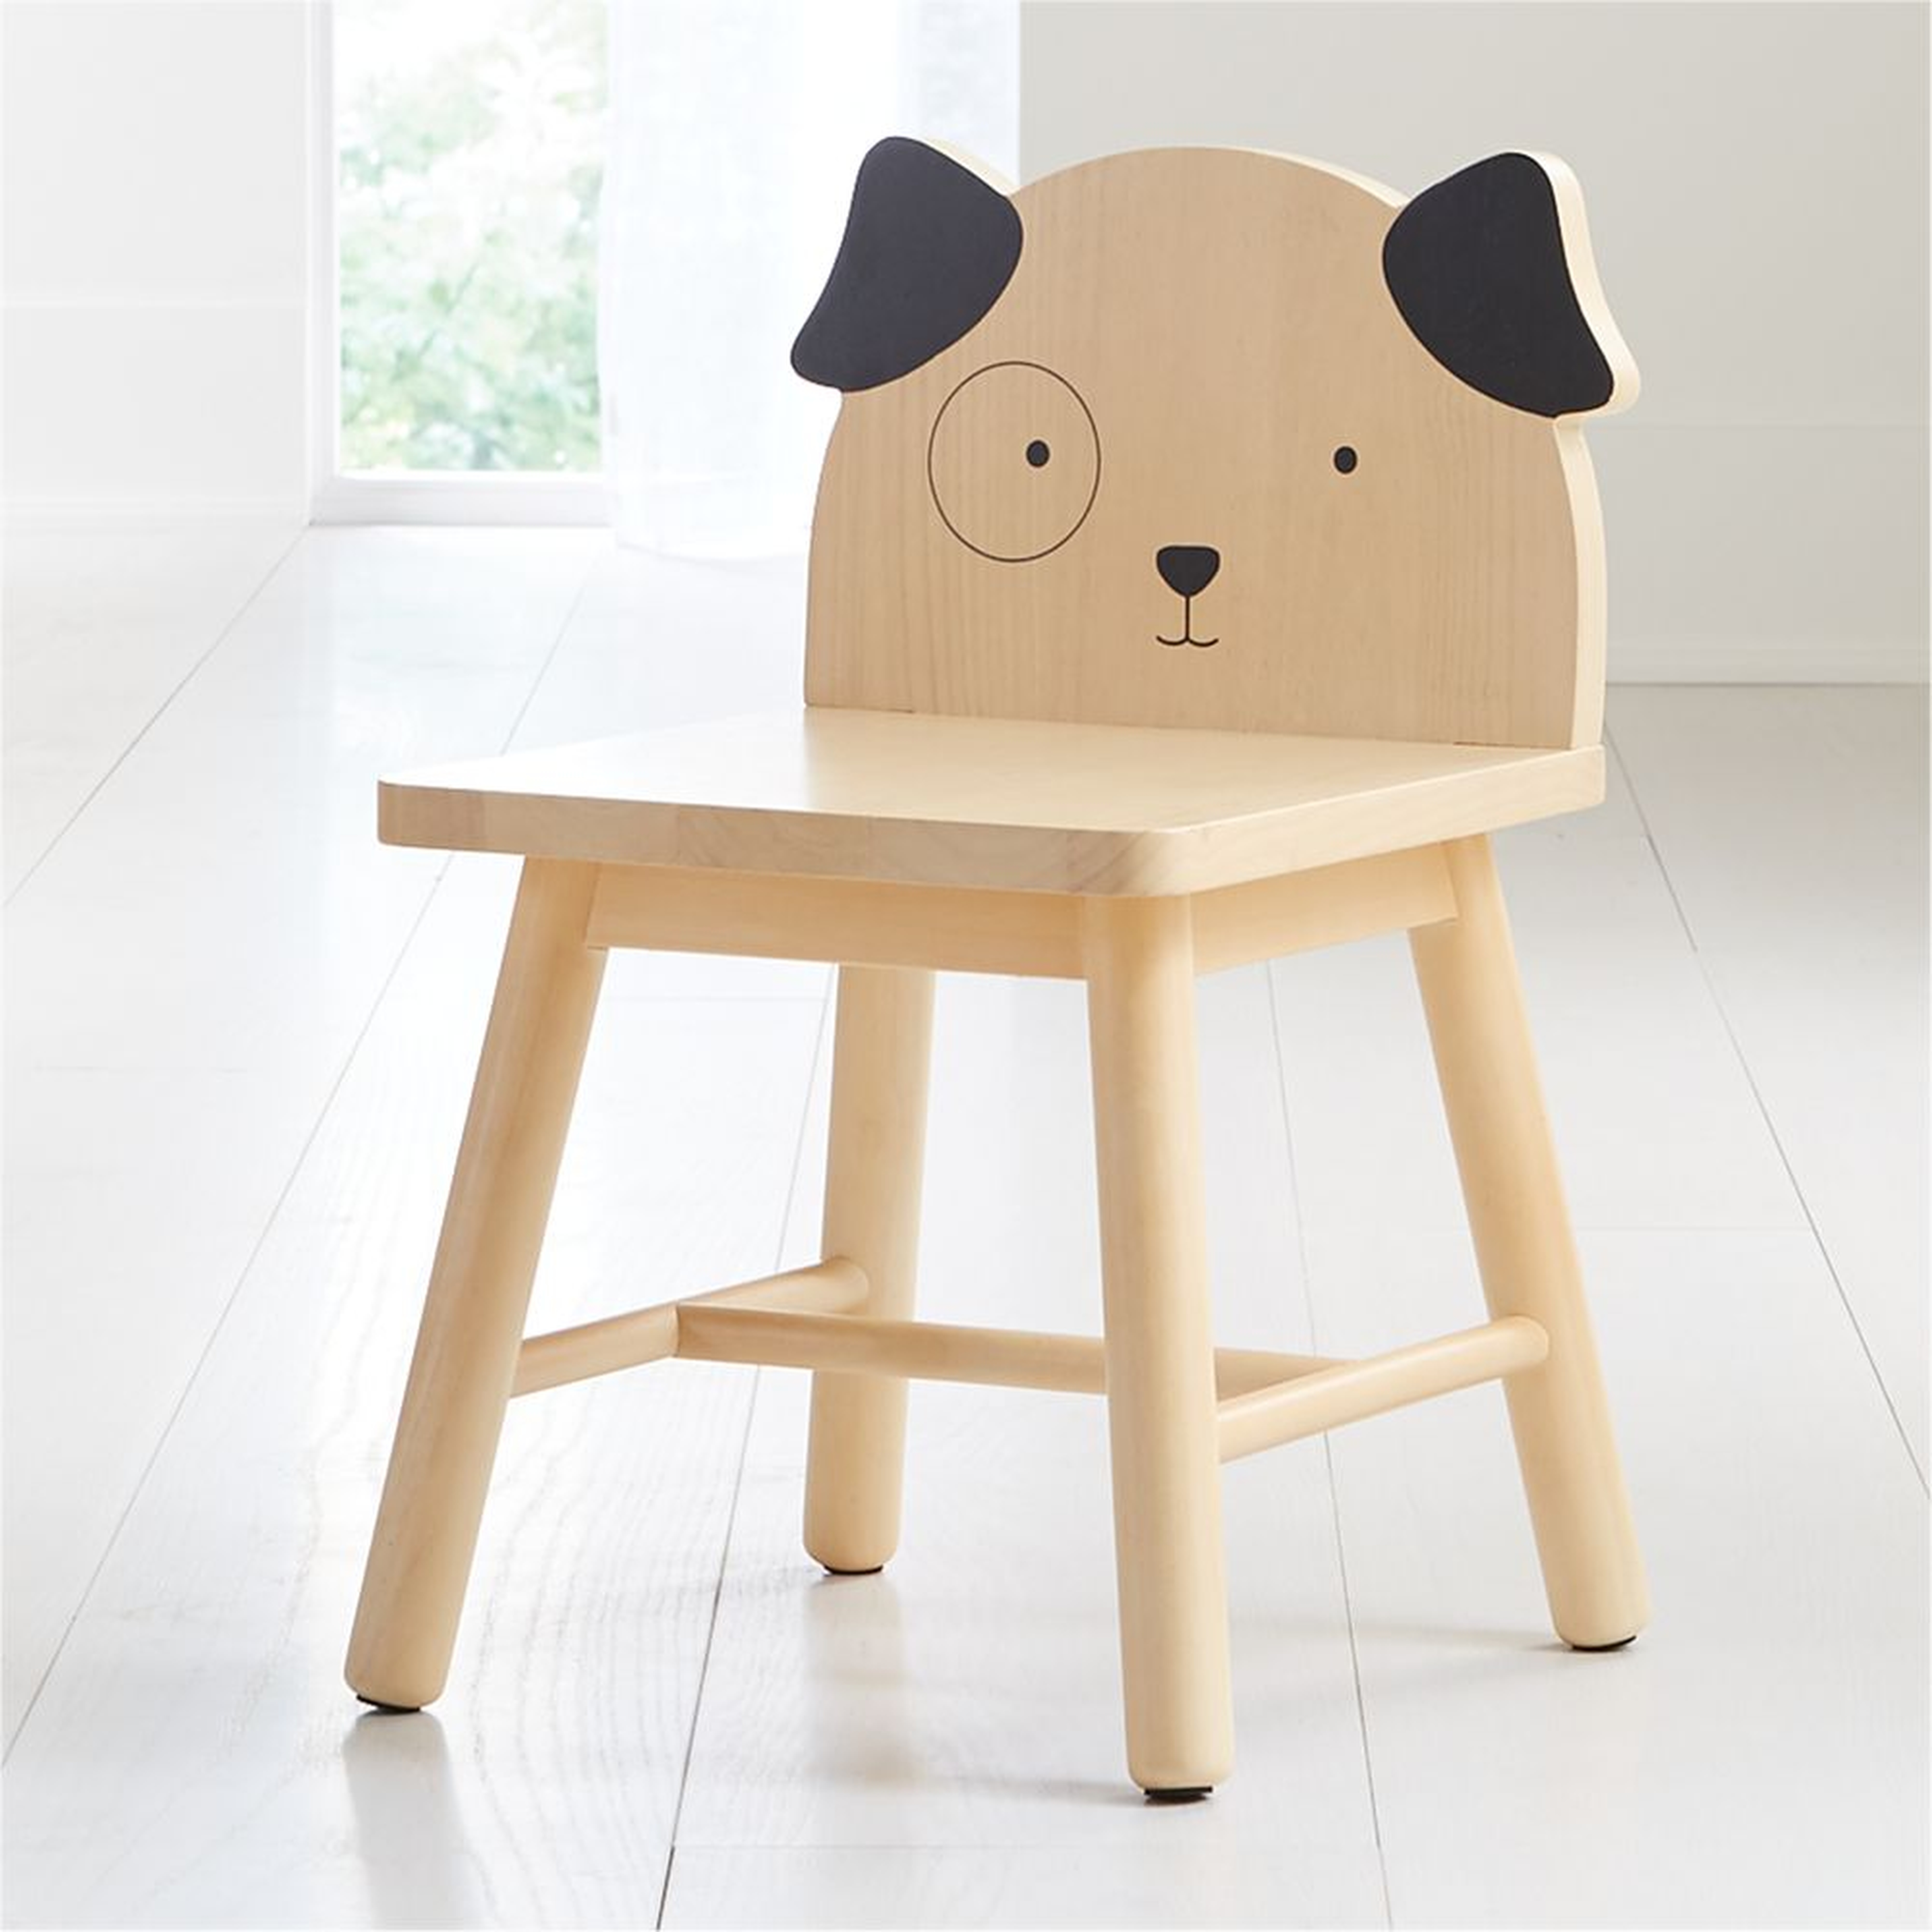 Dog Animal Wood Kids Play Chair - Crate and Barrel